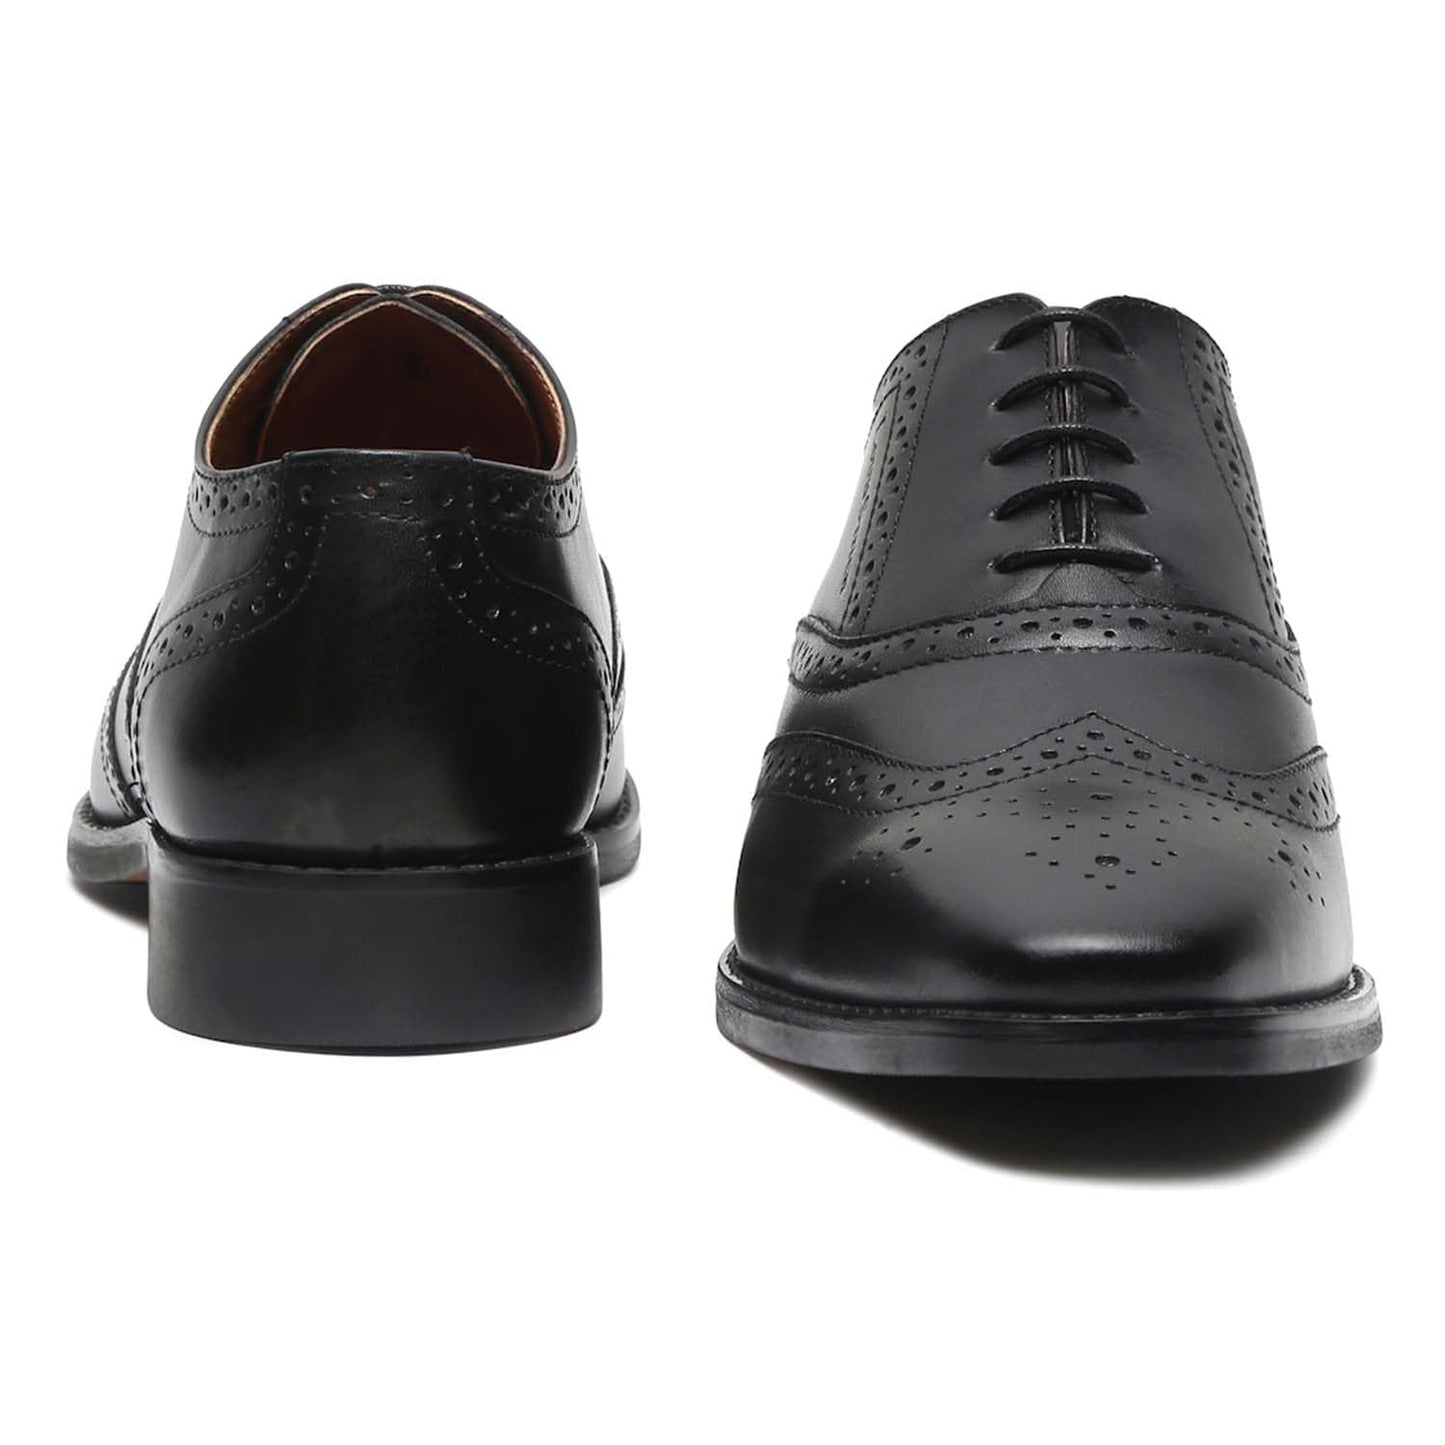 LOUIS STITCH Mens Obsidian Black Italian Leather Wingtip Brogue Handmade Formal Lace Up Shoe for Men (RXBG) - 11 UK